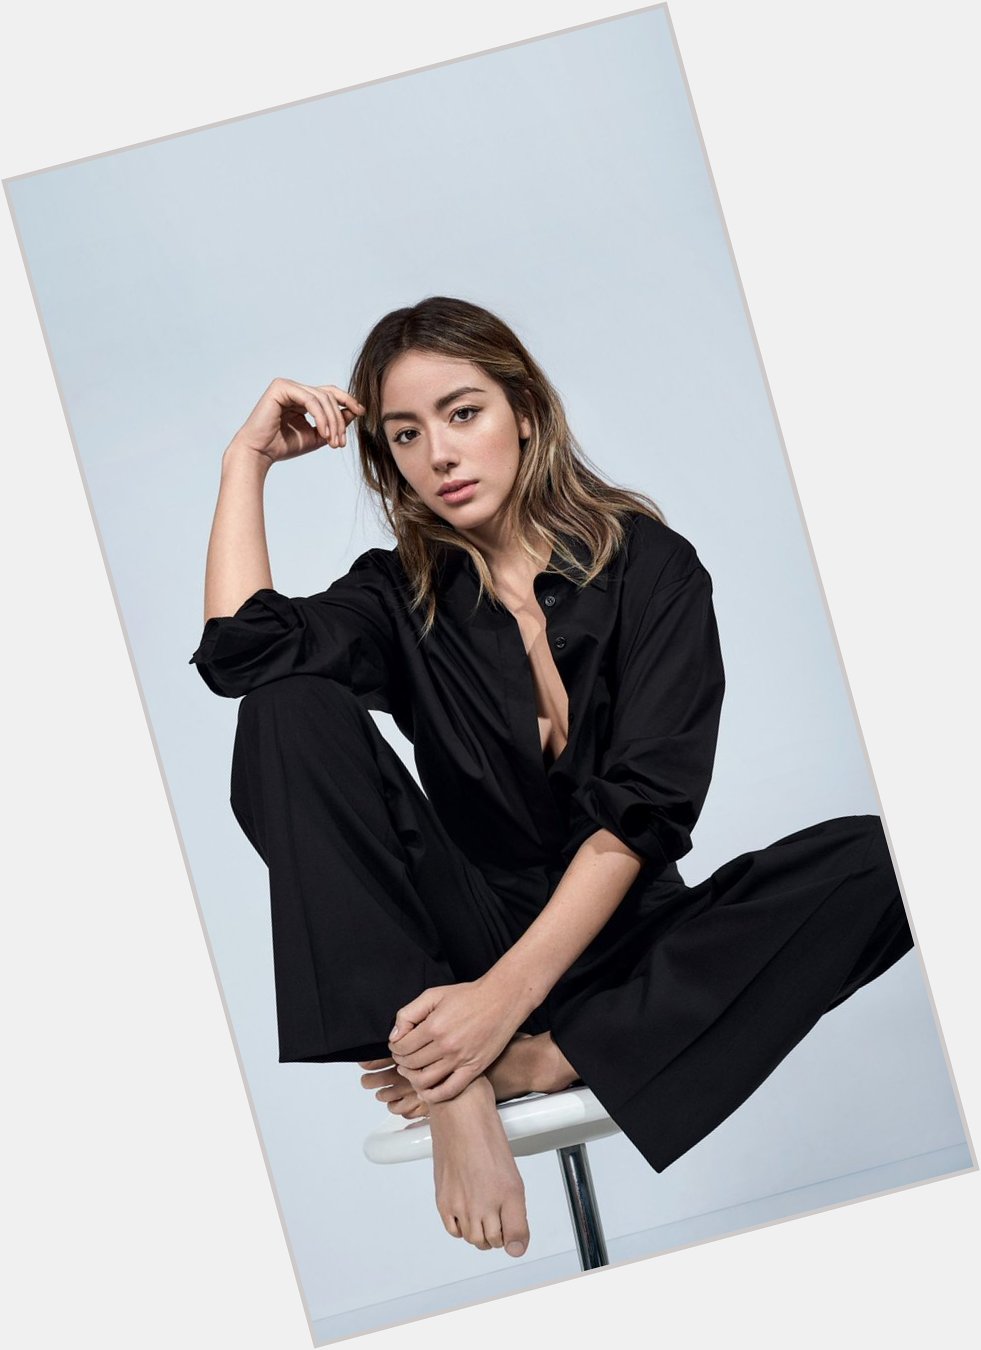 Happy birthday to this beauty, Chloe Bennet! 